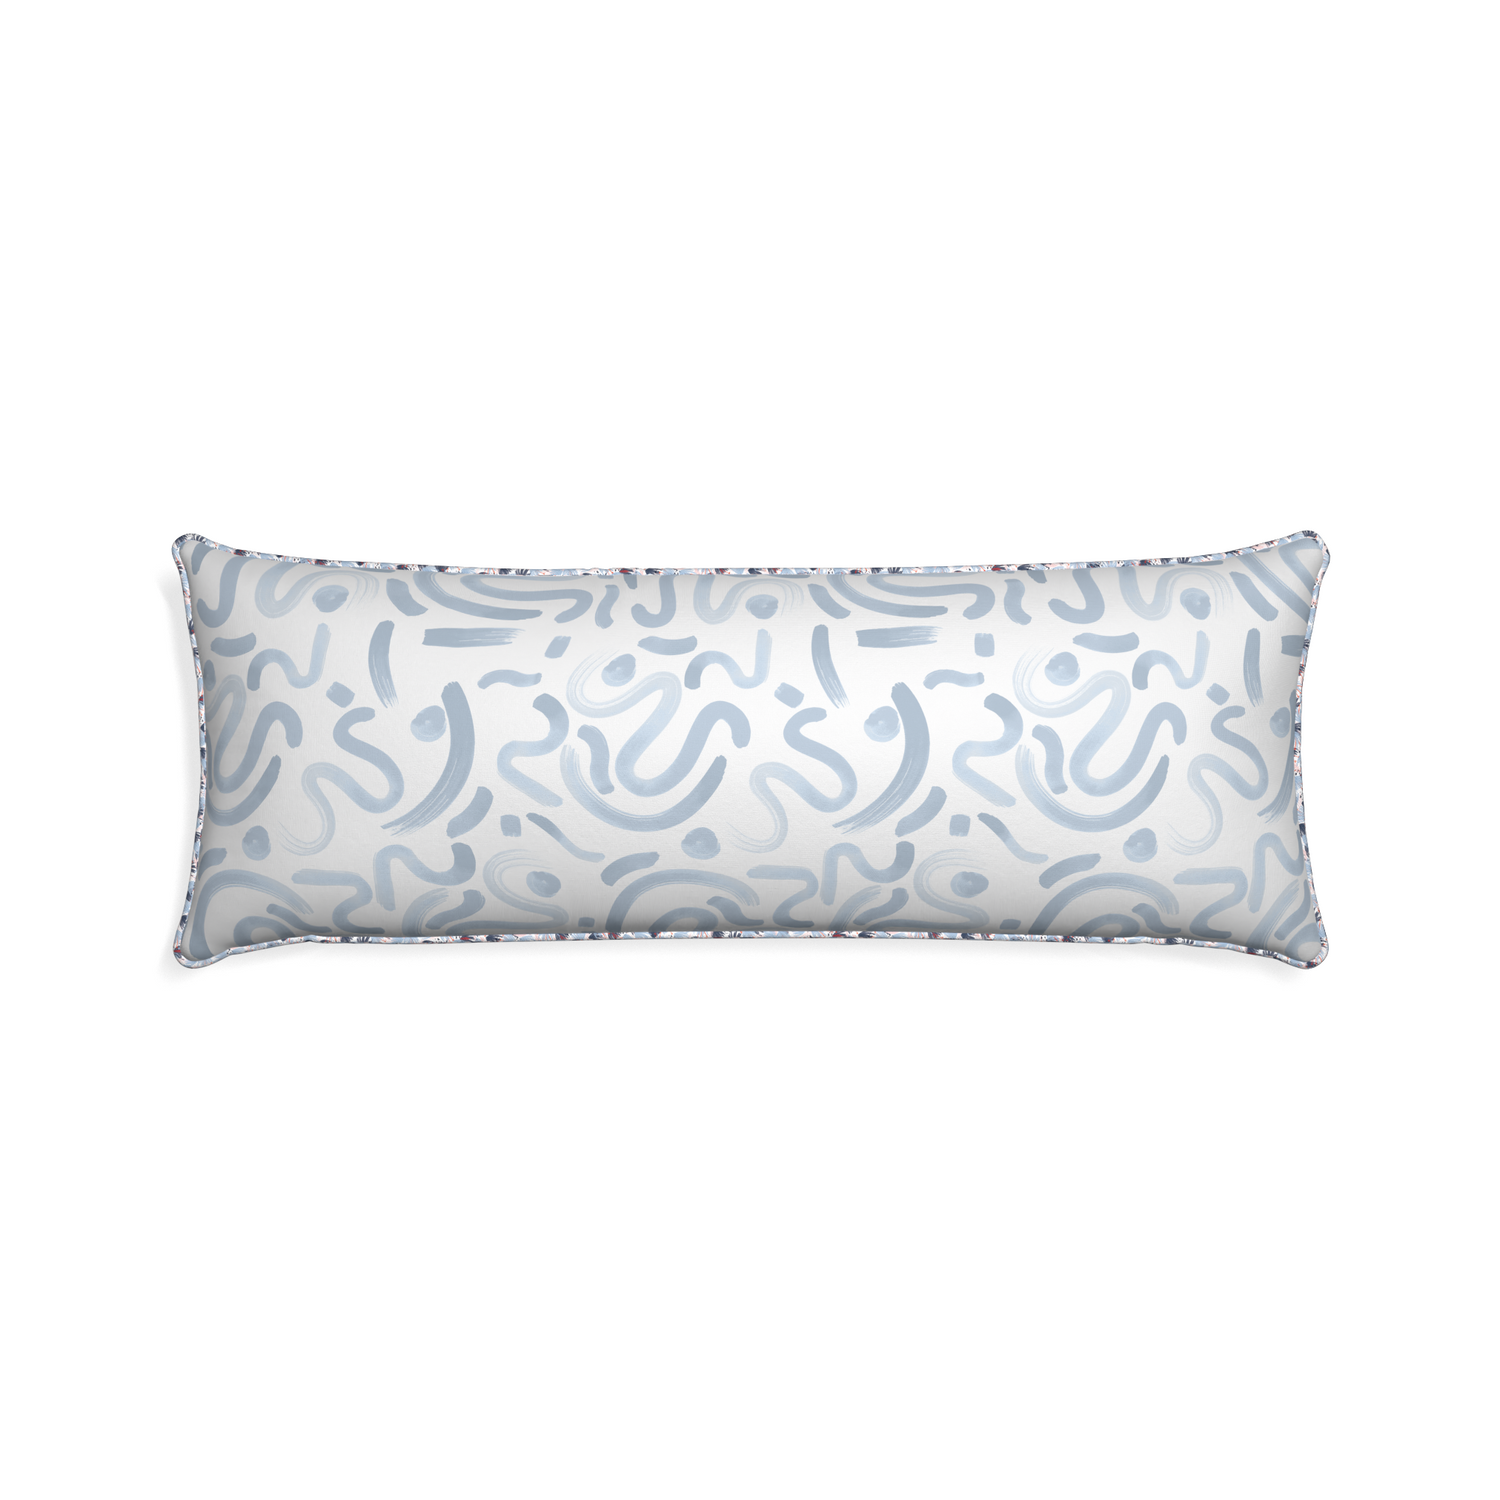 Xl-lumbar hockney sky custom pillow with e piping on white background